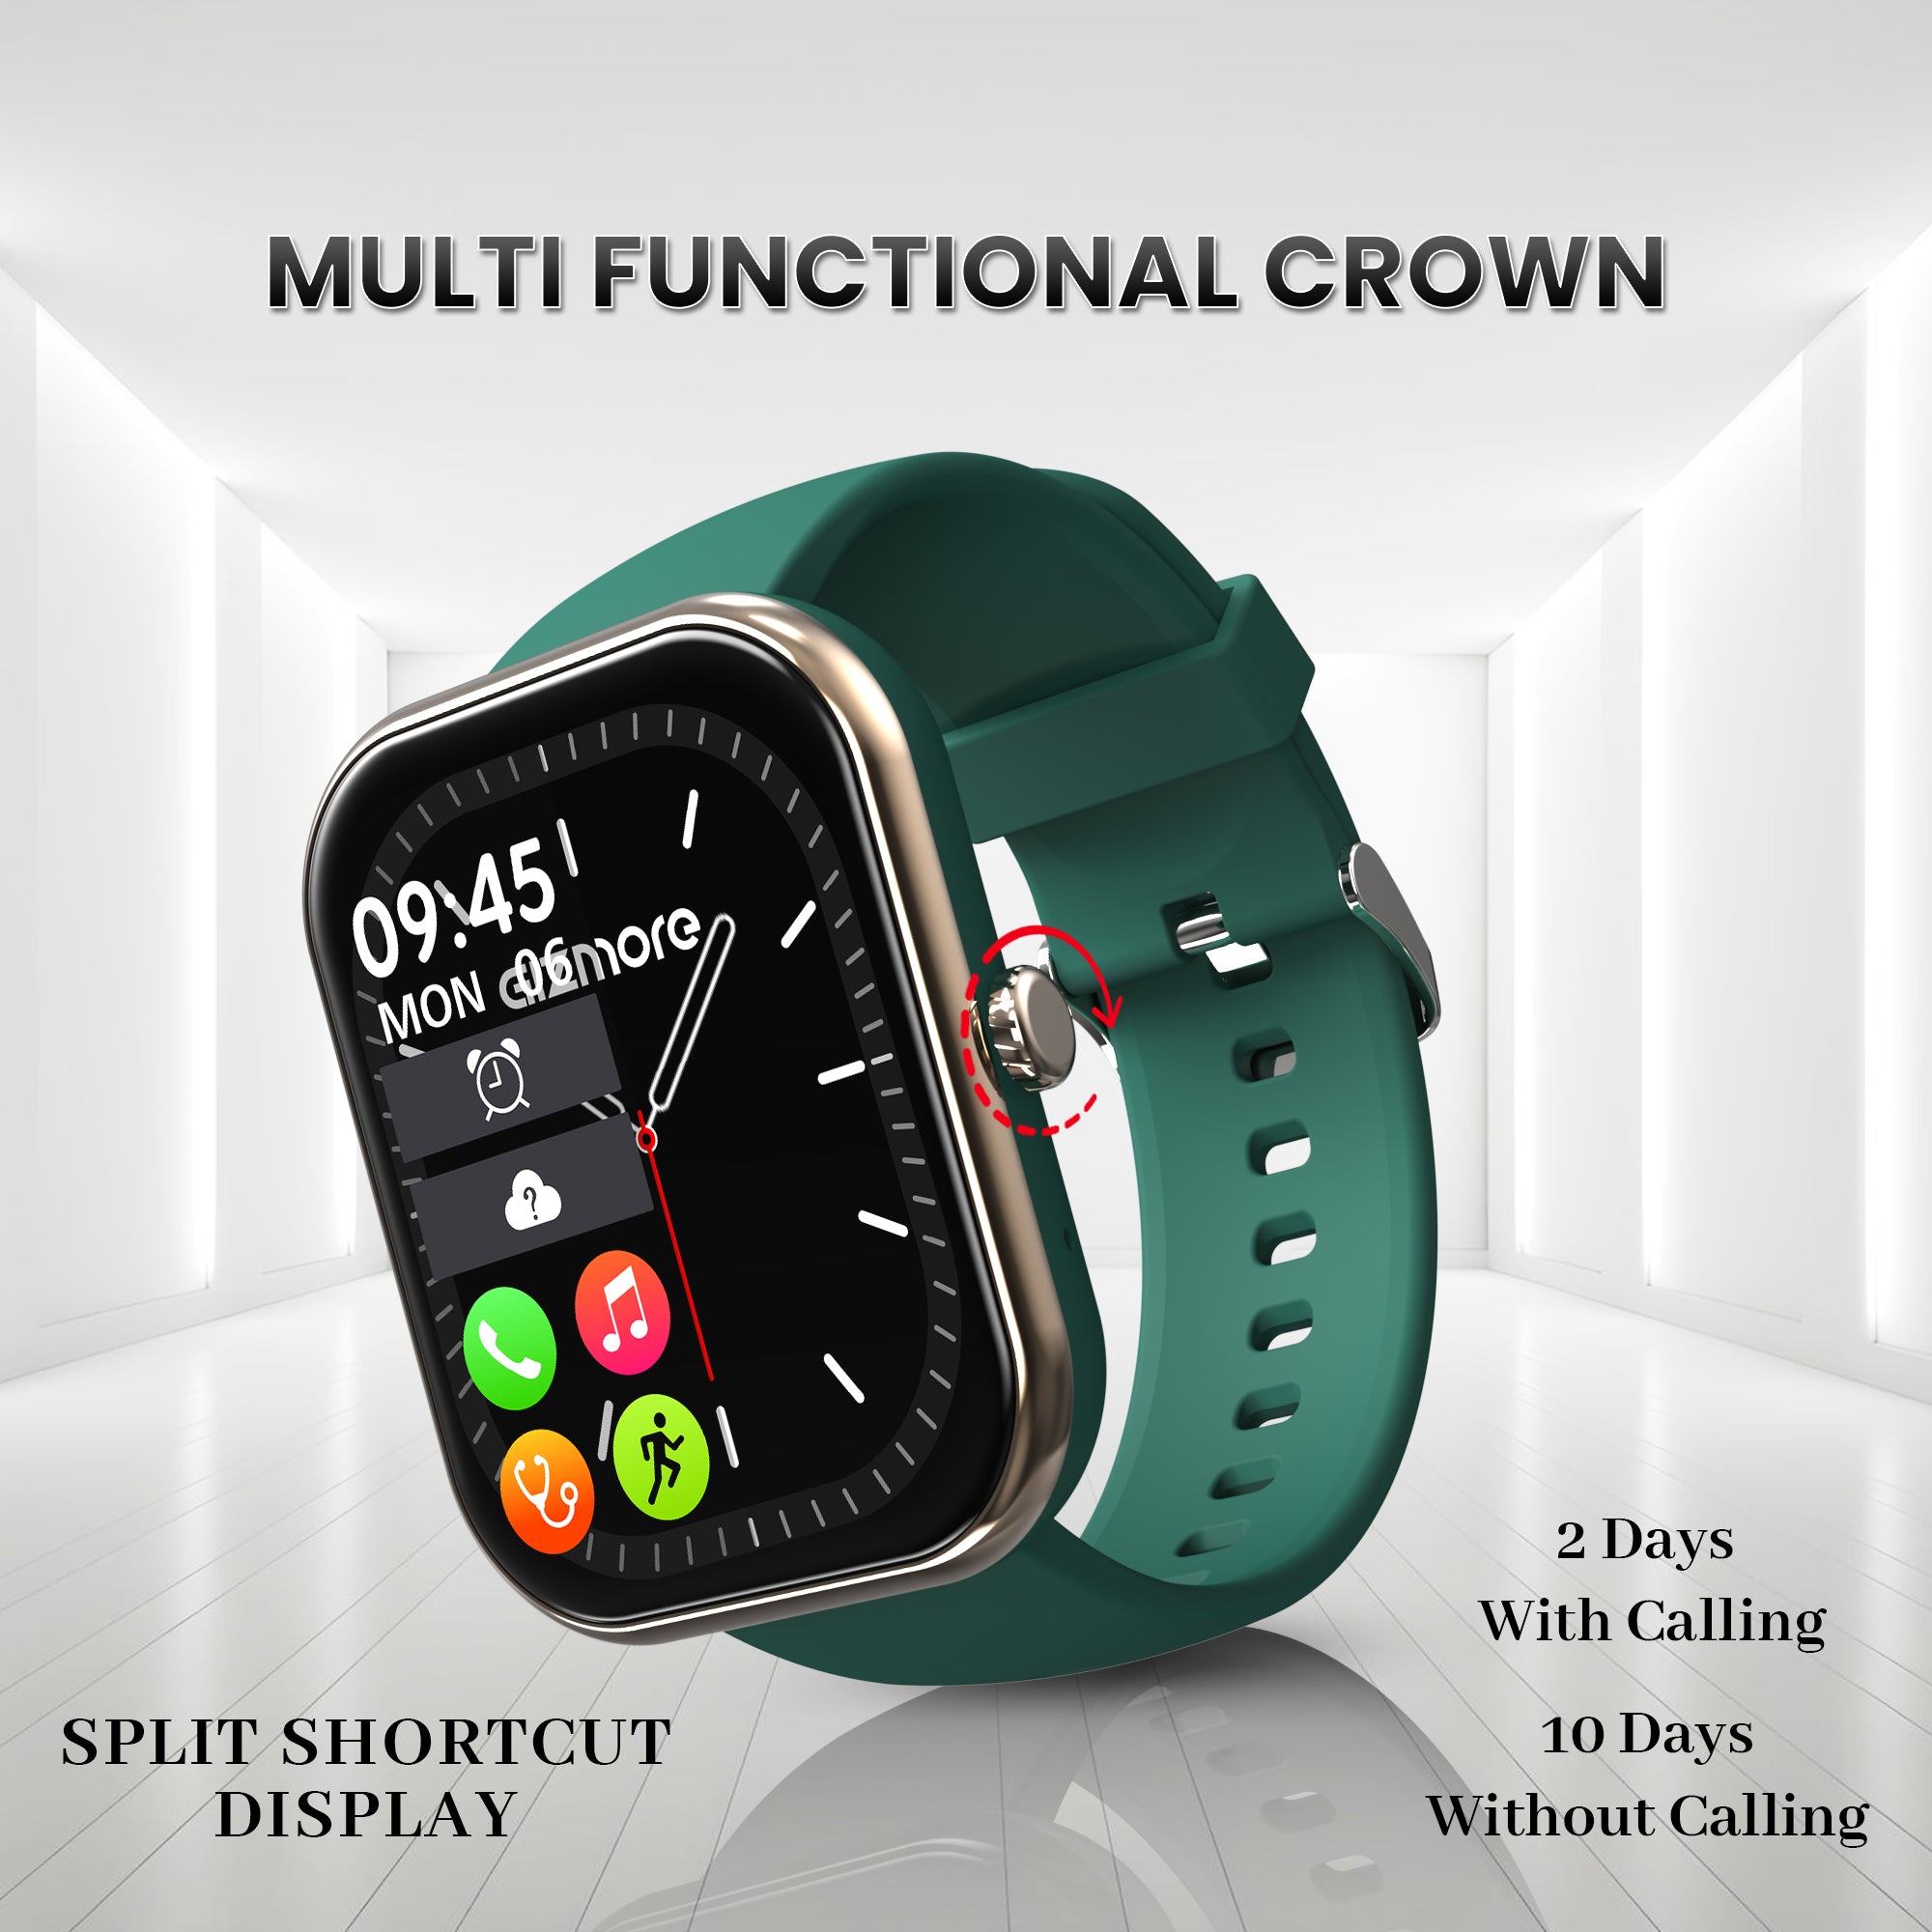 GIZMORE Wave 2.01 (5.11 cm) Always-On-Big Display | 600 NITS Brightness & Split Screen | AI Voice Assistance | Rotating Crown | Health Suite | Bluetooth Calling Smart Watch for Men and Women